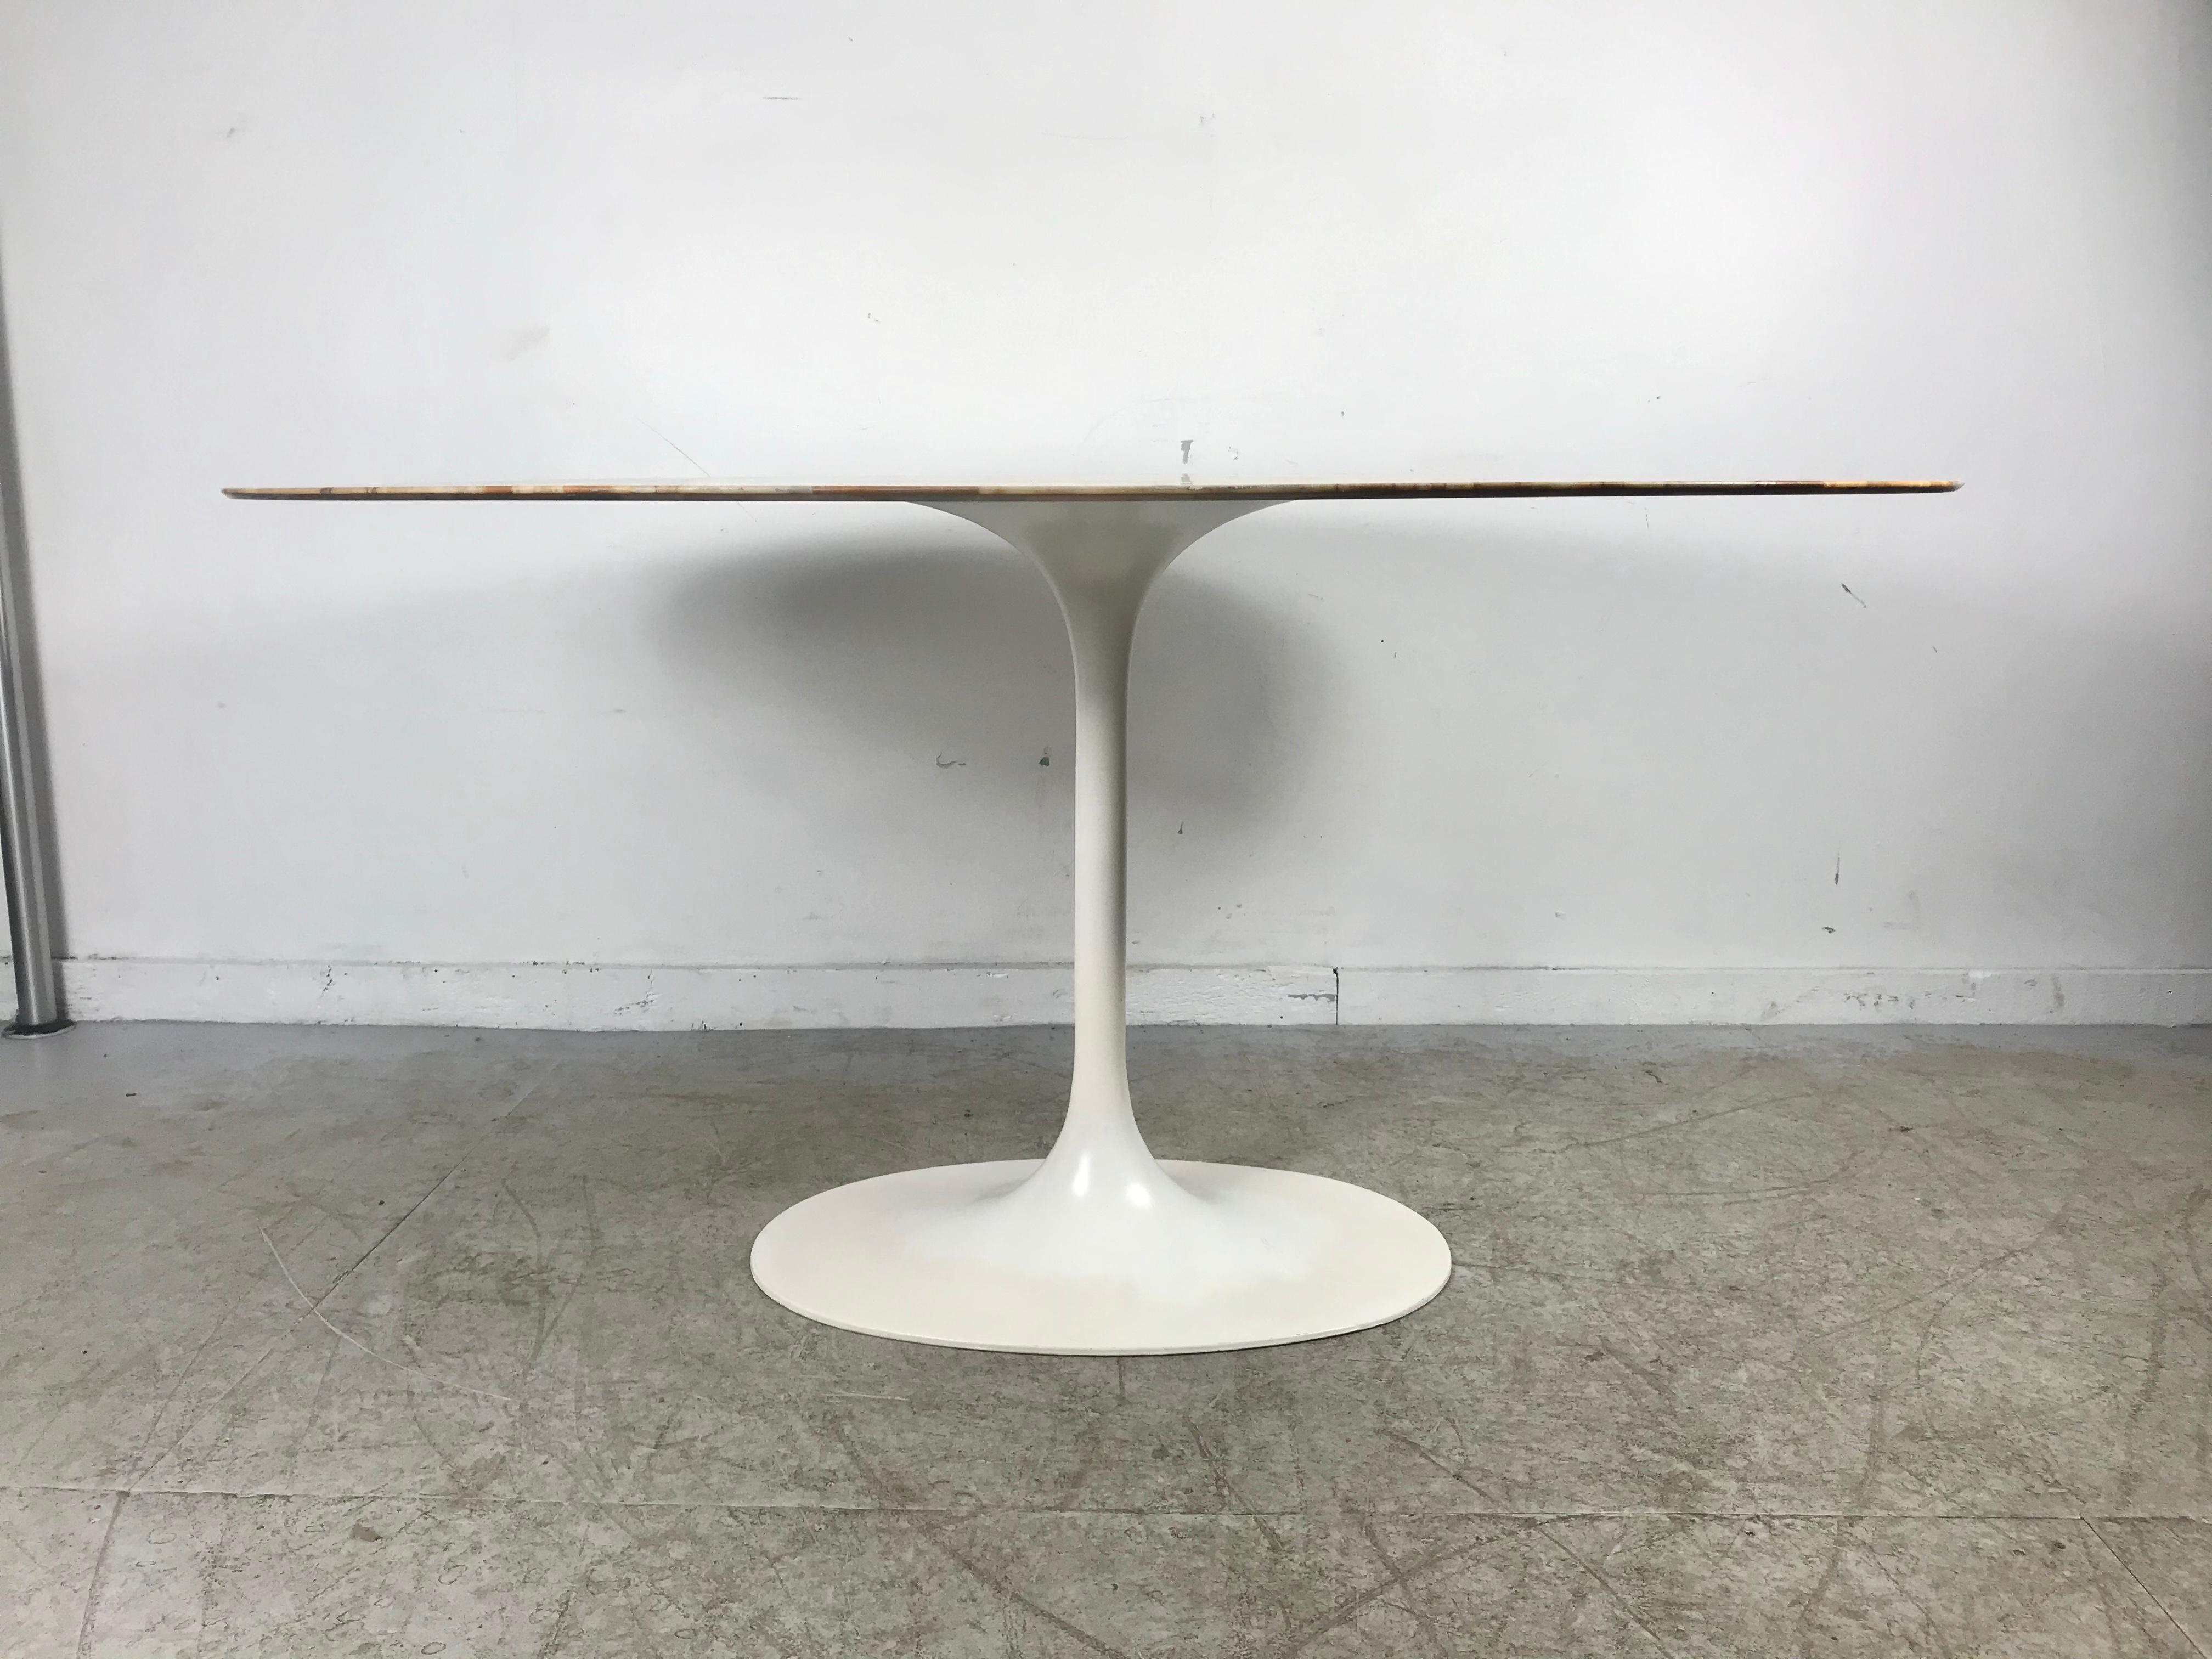 Stunning oval patchwork marble pedestal dining table. Mid-Century Modern design, reminiscent of Classic tulip tables designed by Eero Saarinen for Knoll, amazing patchwork marble top in cream, beige carmel tones, classic oval tulip powder coated